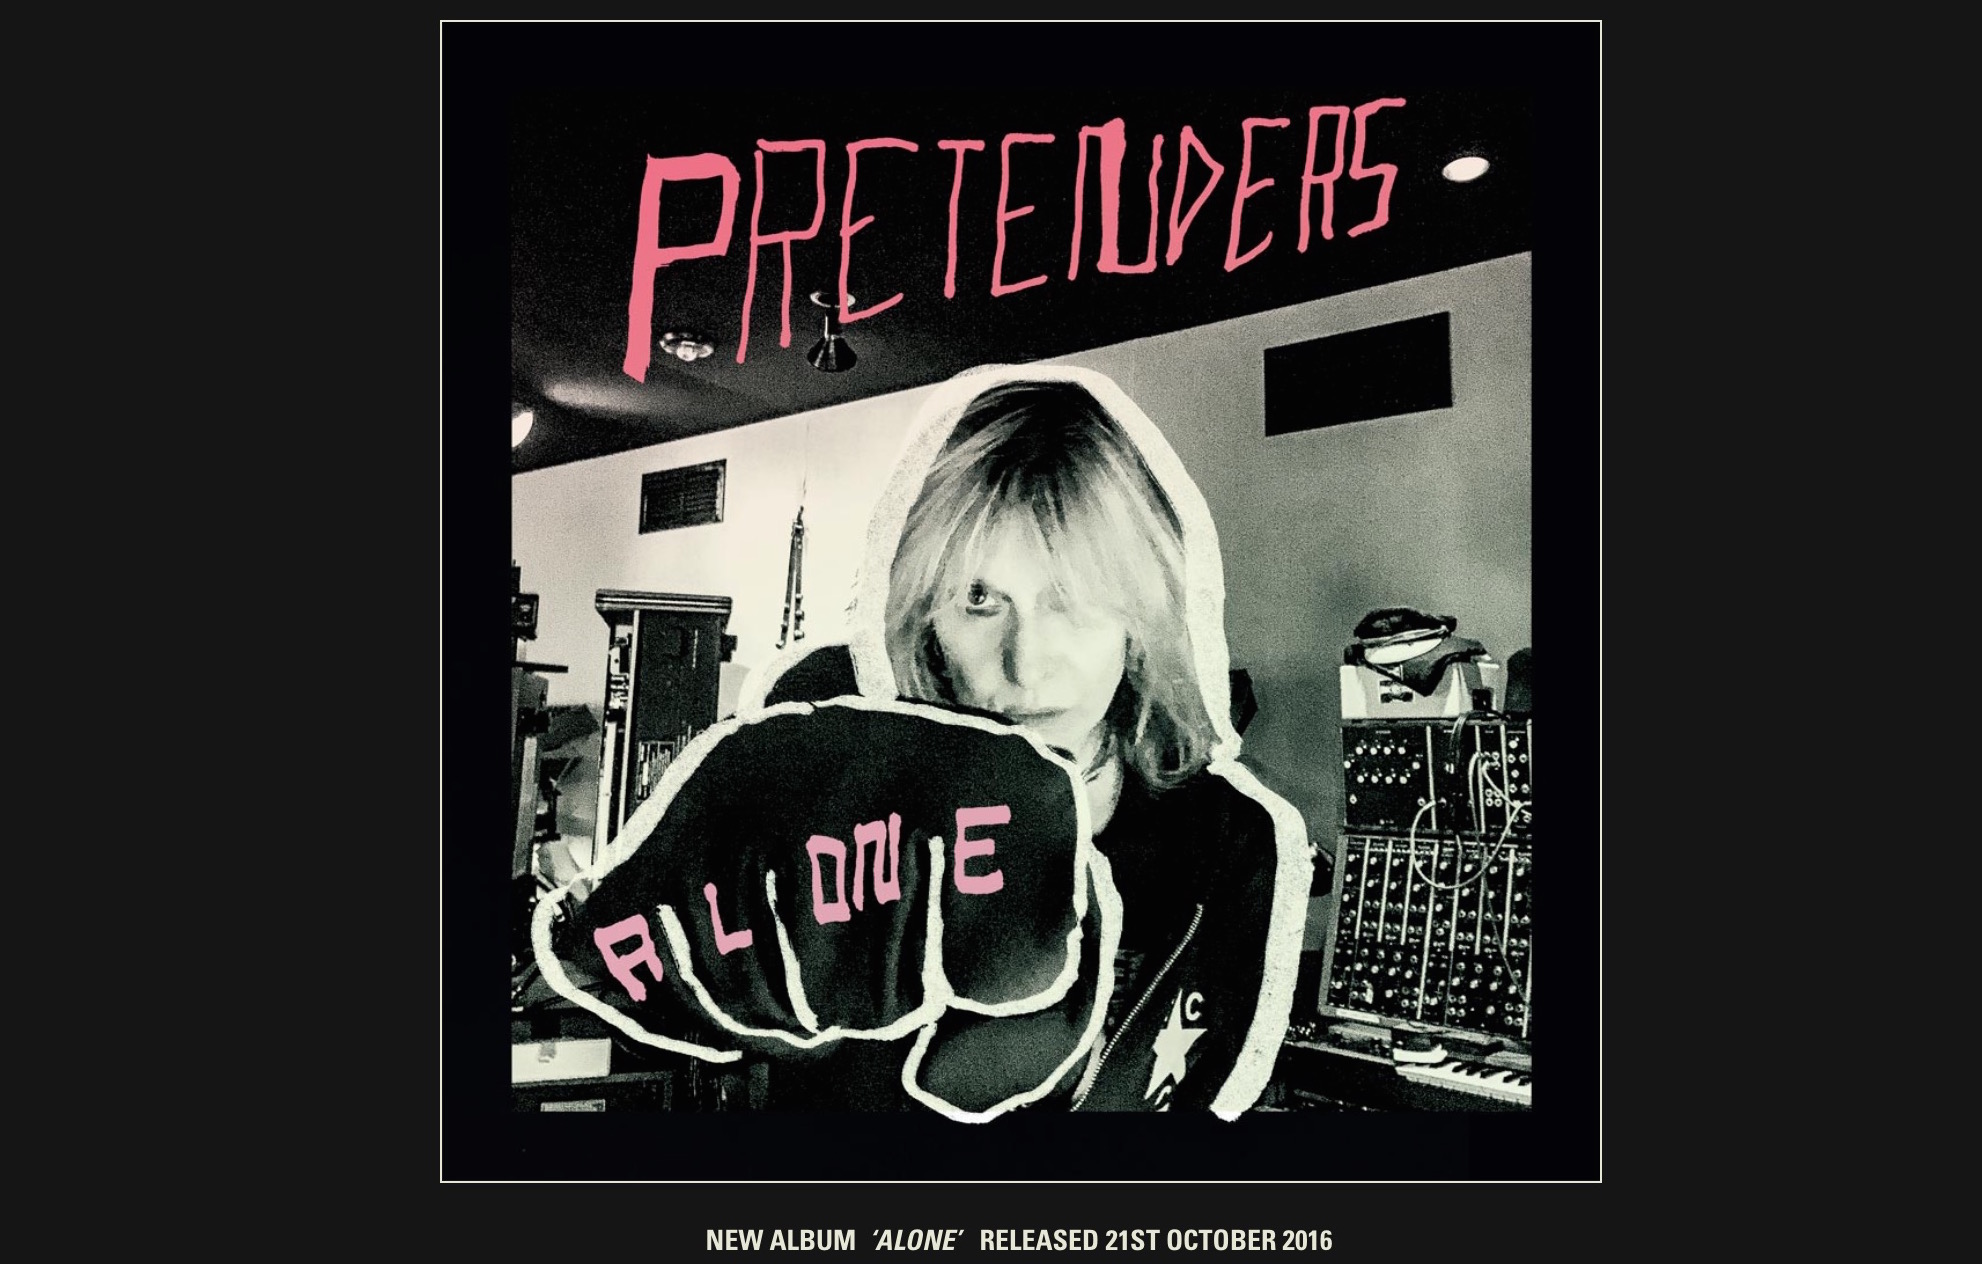 Chrissie Hynde of The Pretenders Talks to KCSN about Alone - by California Rocker